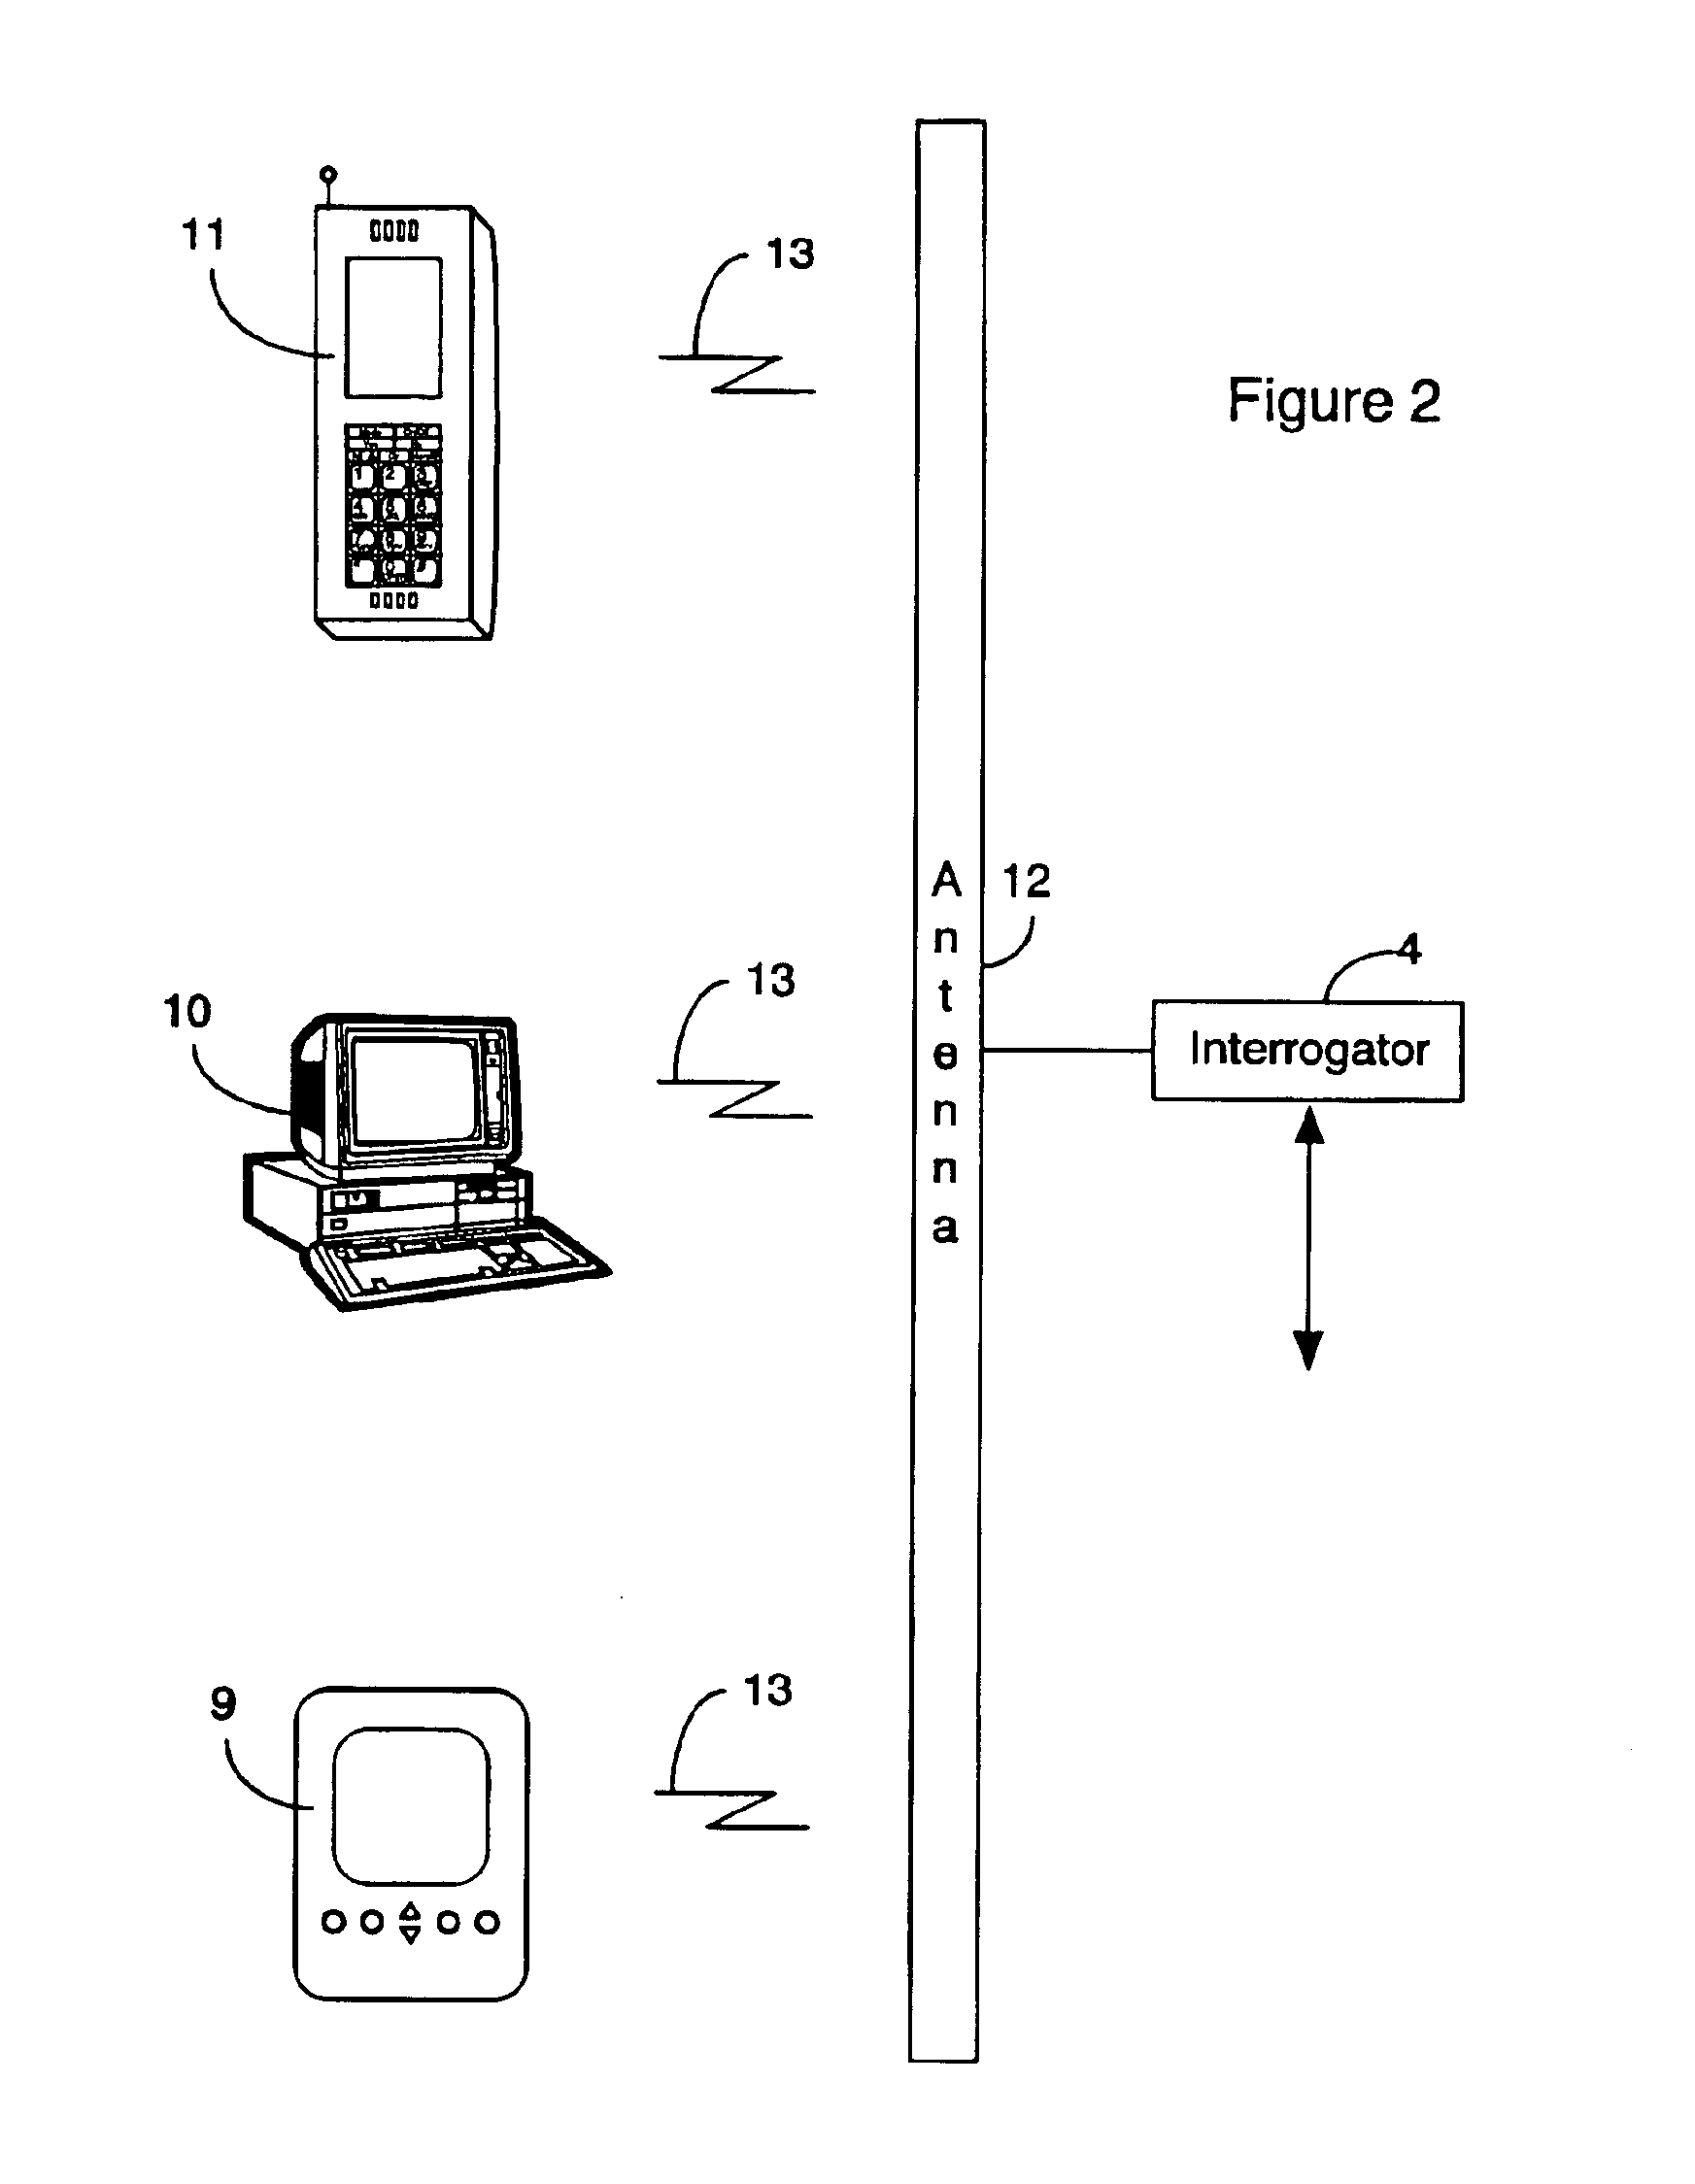 Apparatus and method for delivering information to an individual based on location and/or time